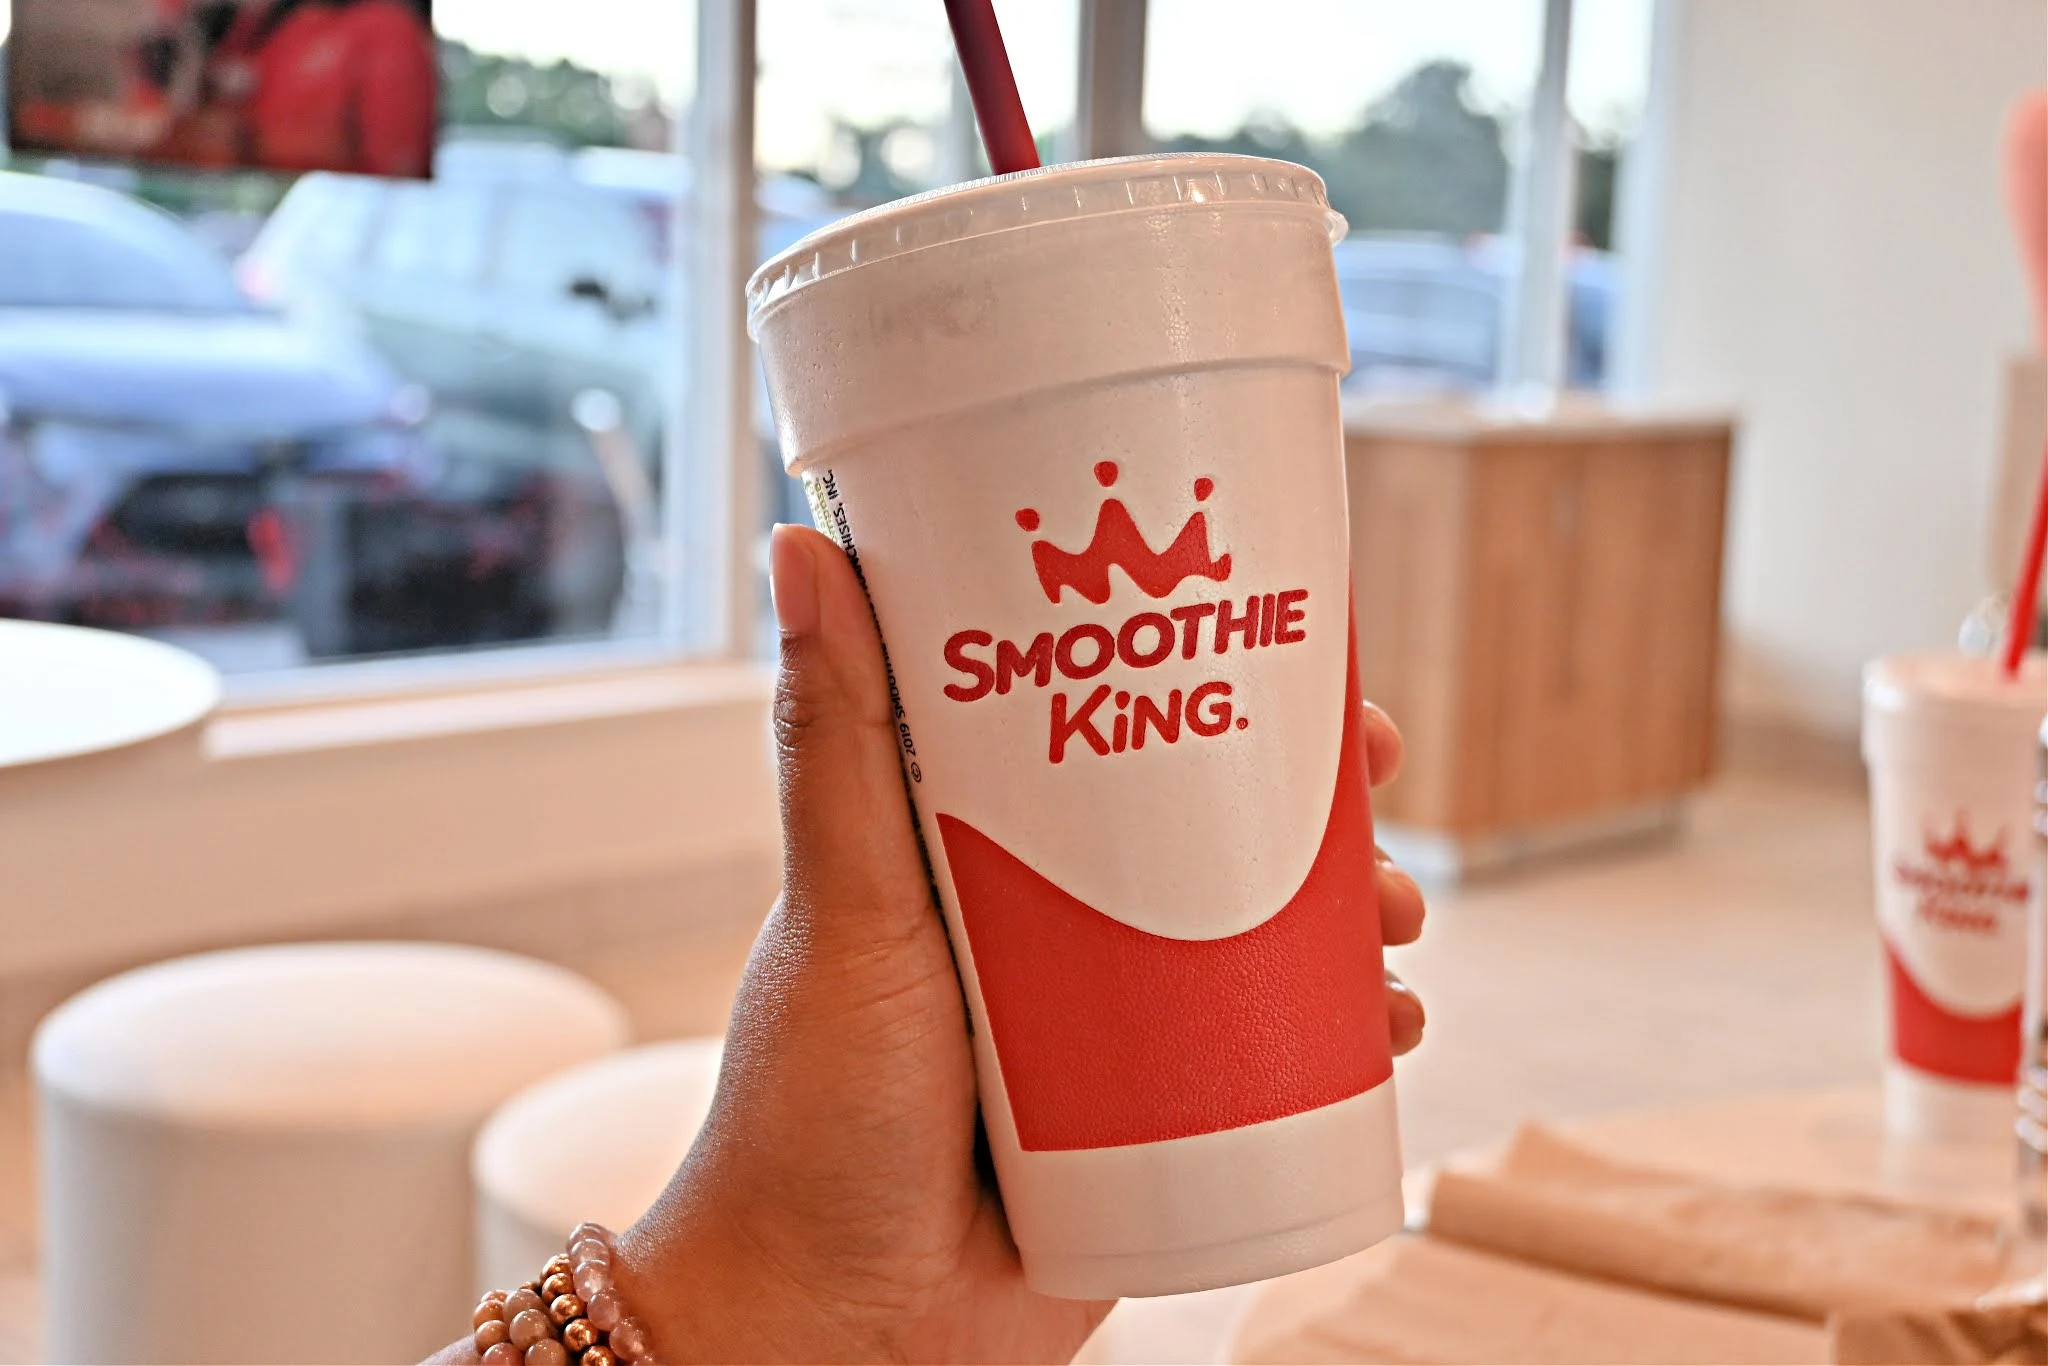 Trying out the New Clean Blend Smoothies at Smoothie King